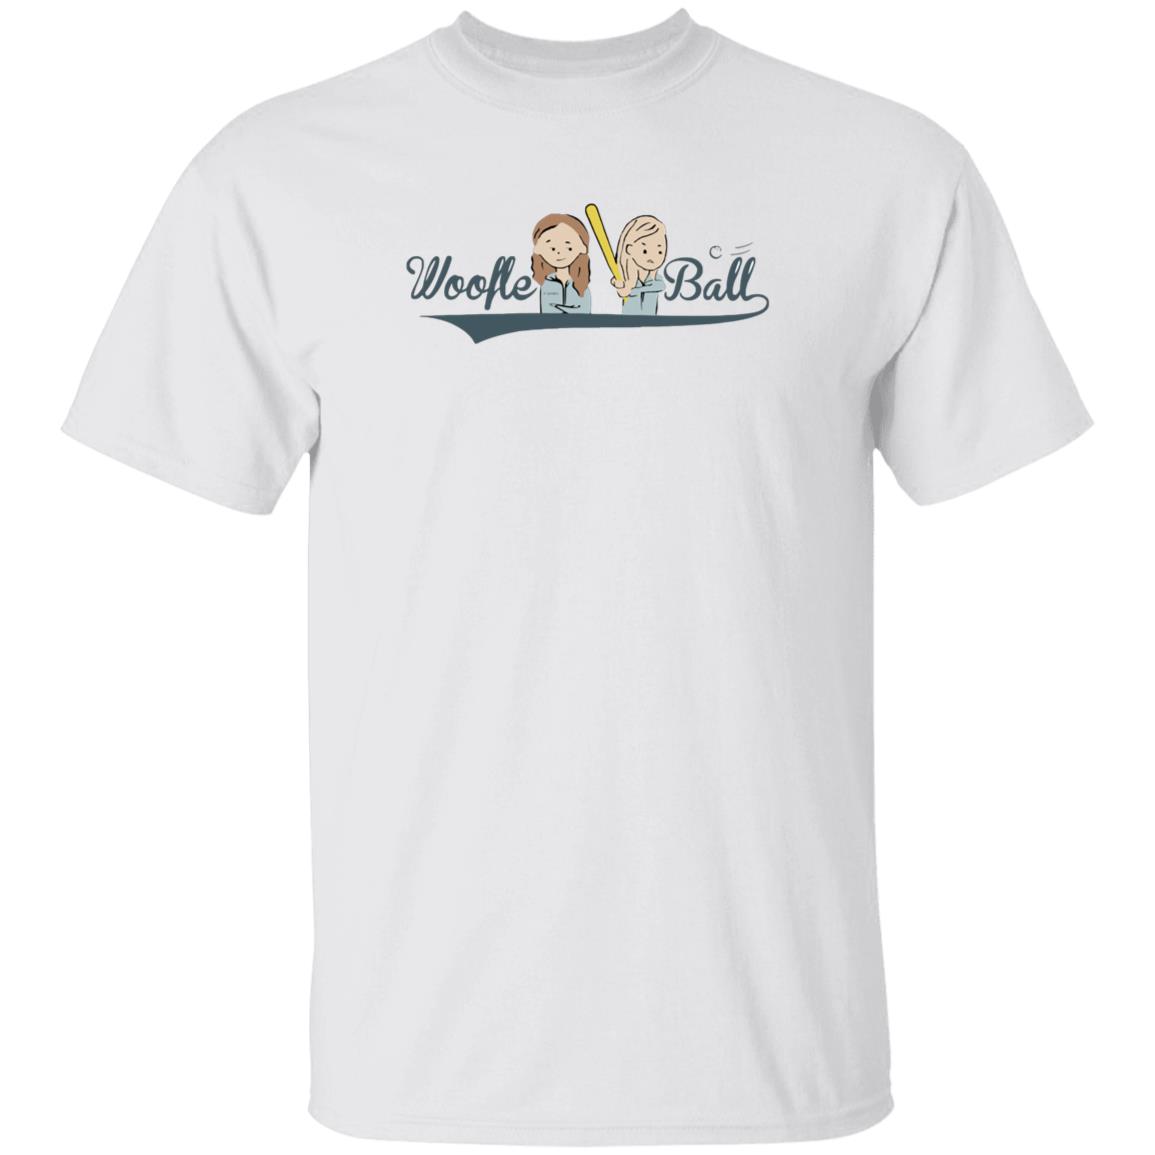 Office Ladies Merch Youth Woofle Ball T-shirt
#OfficeLadiesMerch #YouthWoofleBall #TShirtFashion #USFashionTrends #OfficeApparel #MerchandiseDeals #AmericanYouthStyle #CasualWear #TrendingFashion #BallGameShirts #WorkplaceStyle #PopularTeesUS

tipatee.com/product/office…